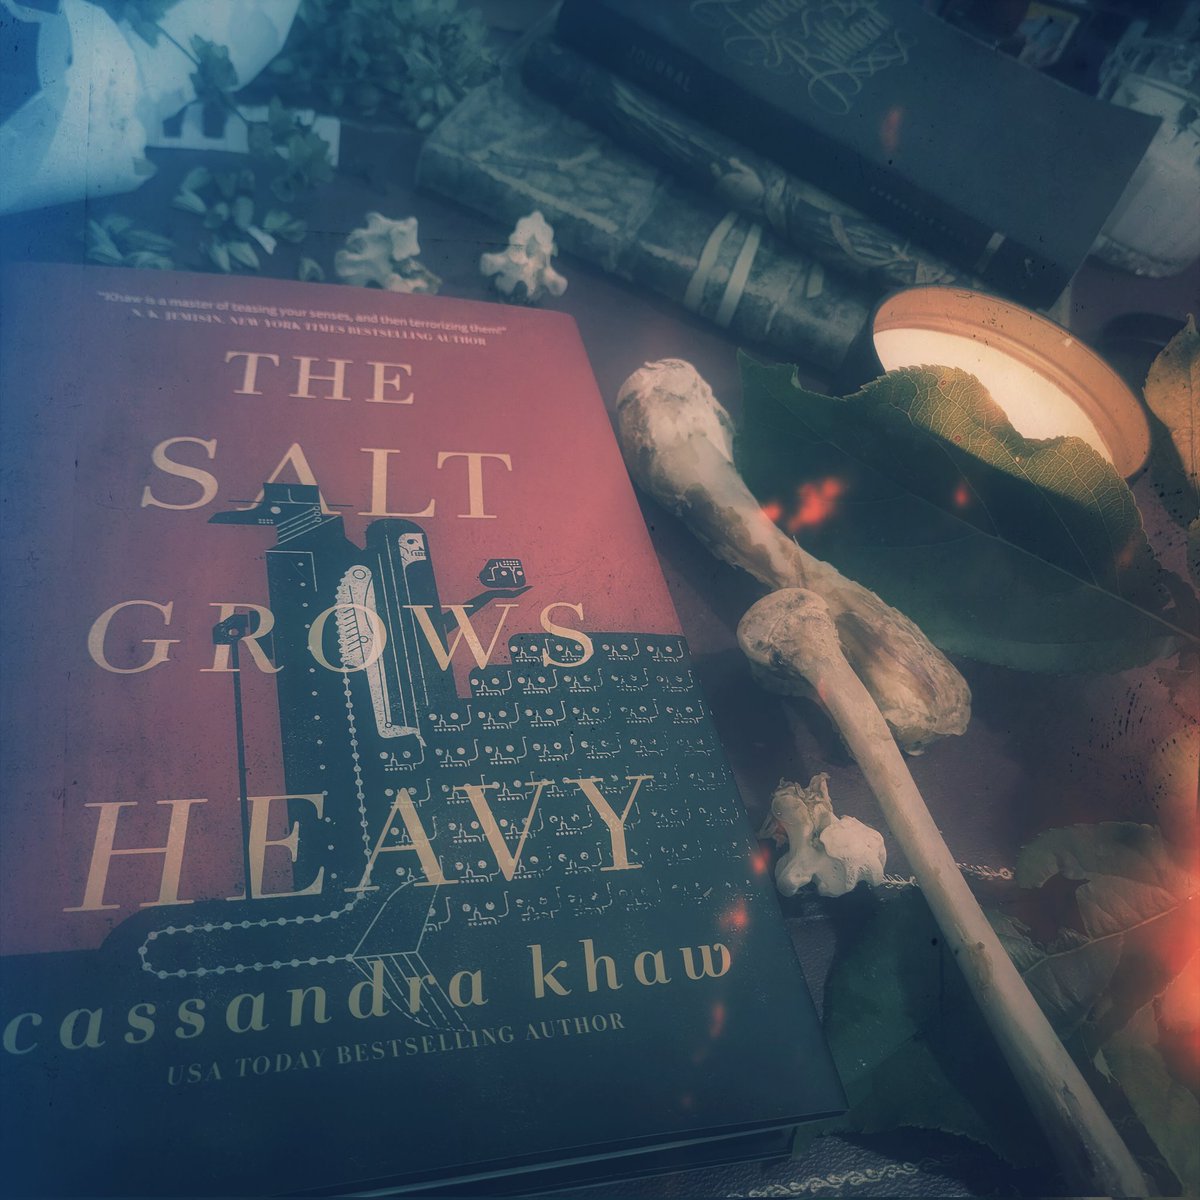 Finished #thesaltgrowsheavy by the super talented @casskhaw This book spoke to my soul. It's so beautiful I could barely stand it at times. The writing took my breath away. This mixture of folk whimsy & #horror gets under my skin in the most delicious way #folkhorror #darkmermaid